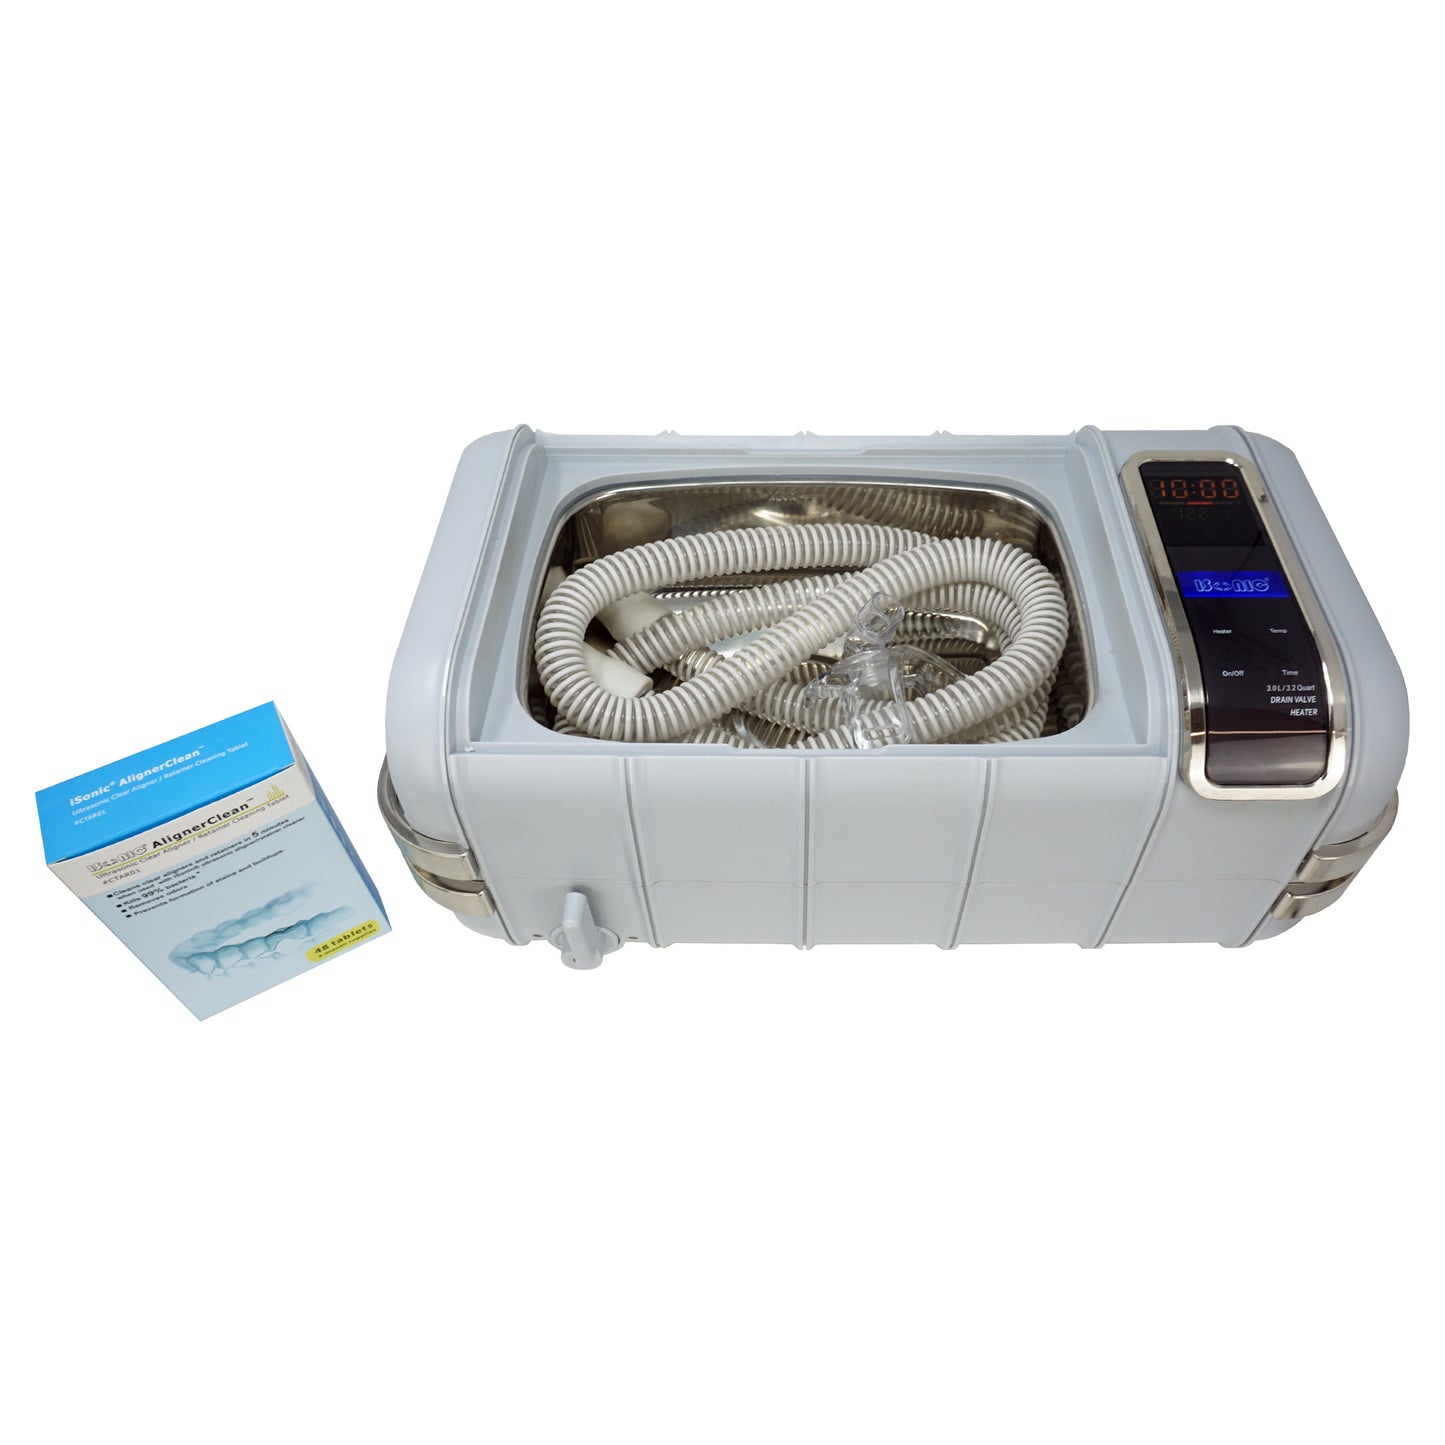 P4831-CPAP (medium) | iSonic® Ultrasonic CPAP/BiPAP Cleaner, 0.8Gal/3L, with a stainless steel weight bracket, a box of cleaning tablet, plastic basket, heater, drain, Free Shipping!